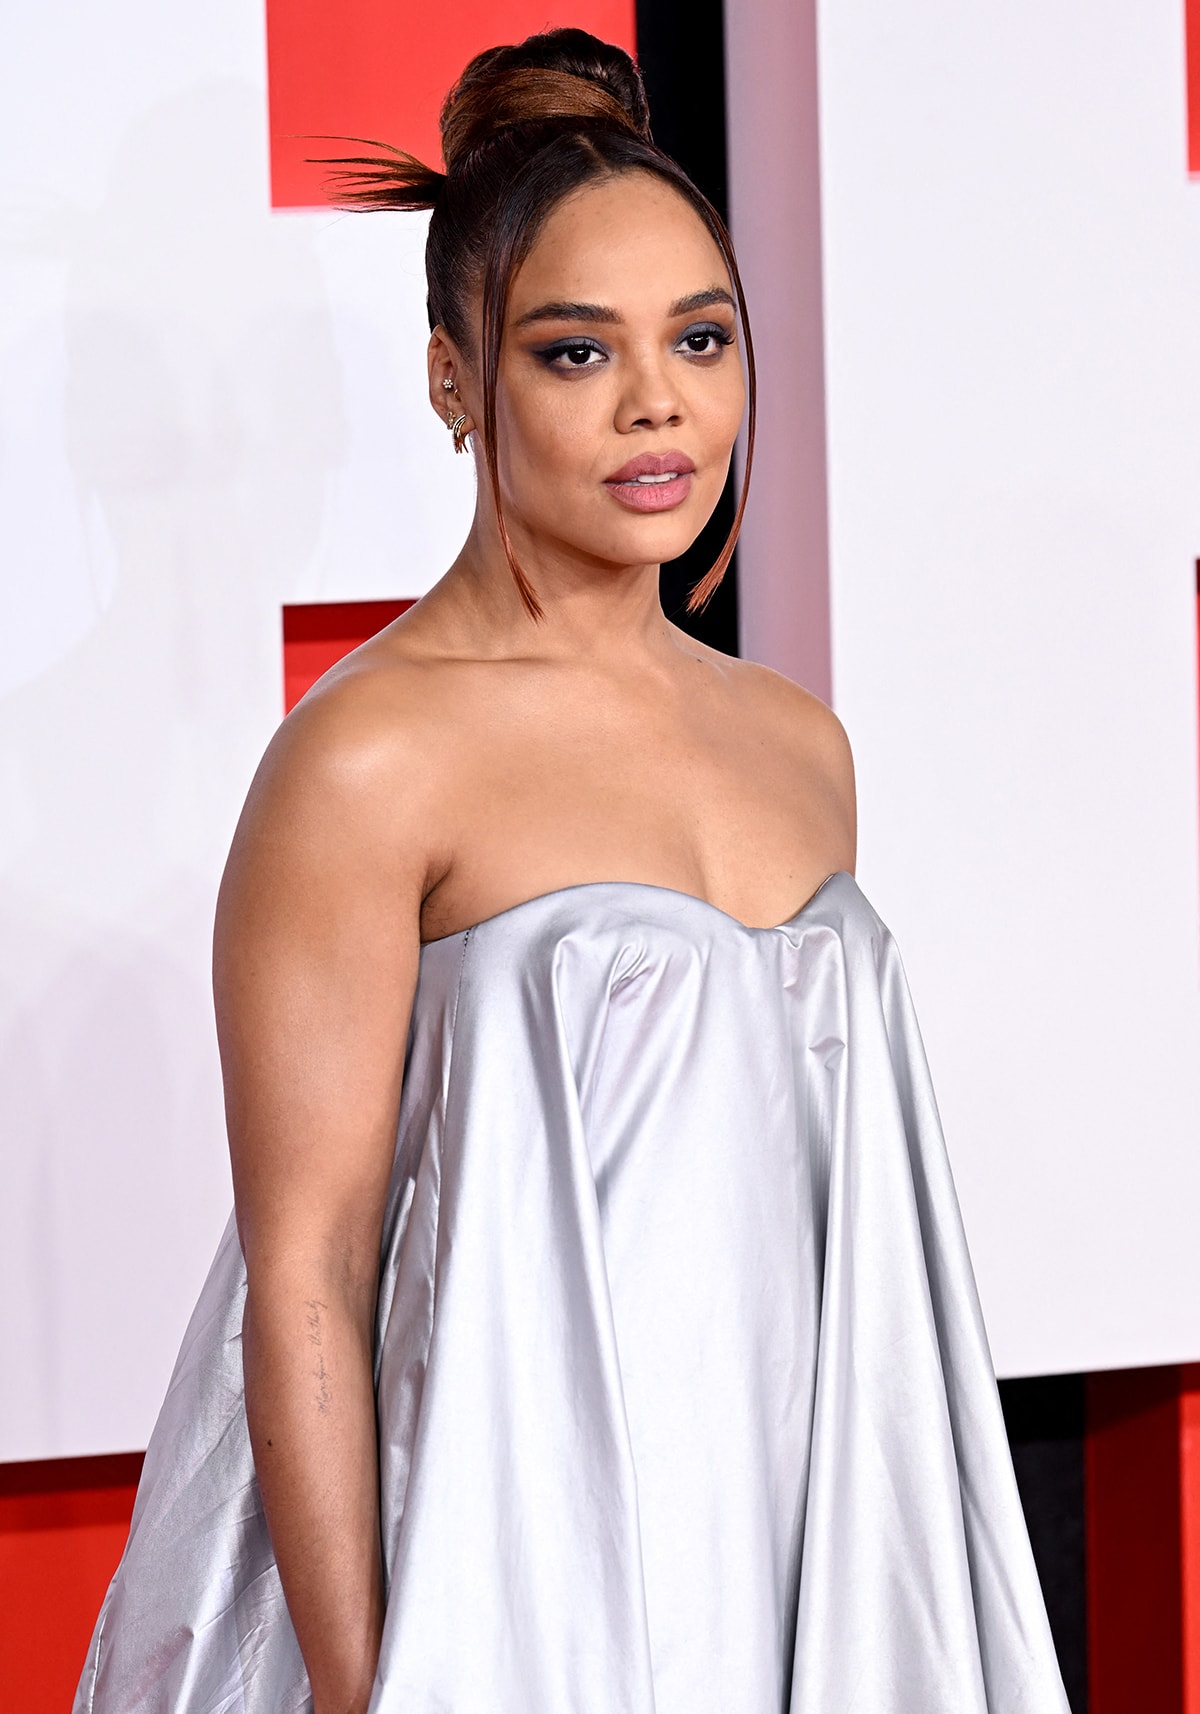 Tessa Thompson styles her tresses in a bun with face-framing fringe and wears black smokey eyeshadow with matte pink lip color